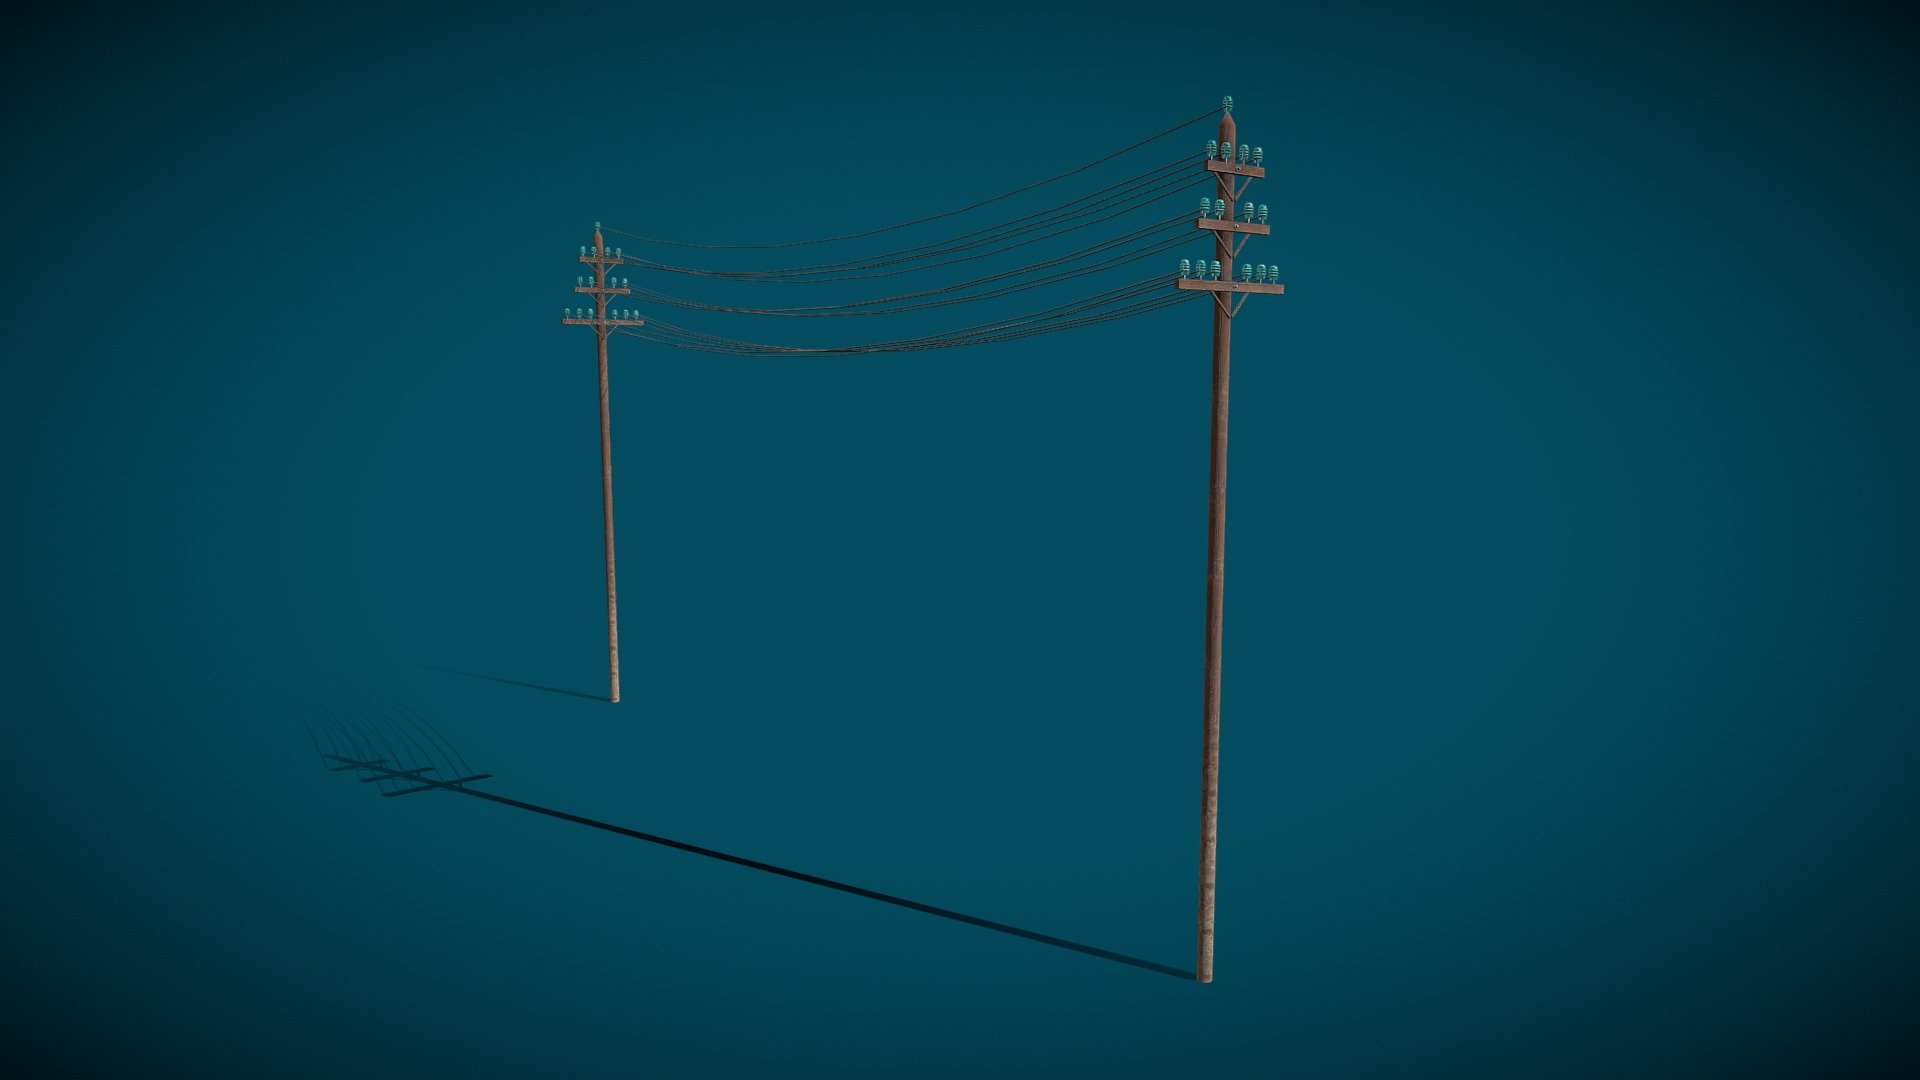 Low poly electricity poles/wires from the late 1800's.  Made for the https://ancestoriesxr.com/ project, currently in development.  For sale on Sketchfab with permission by AncestoriesXR 3d model